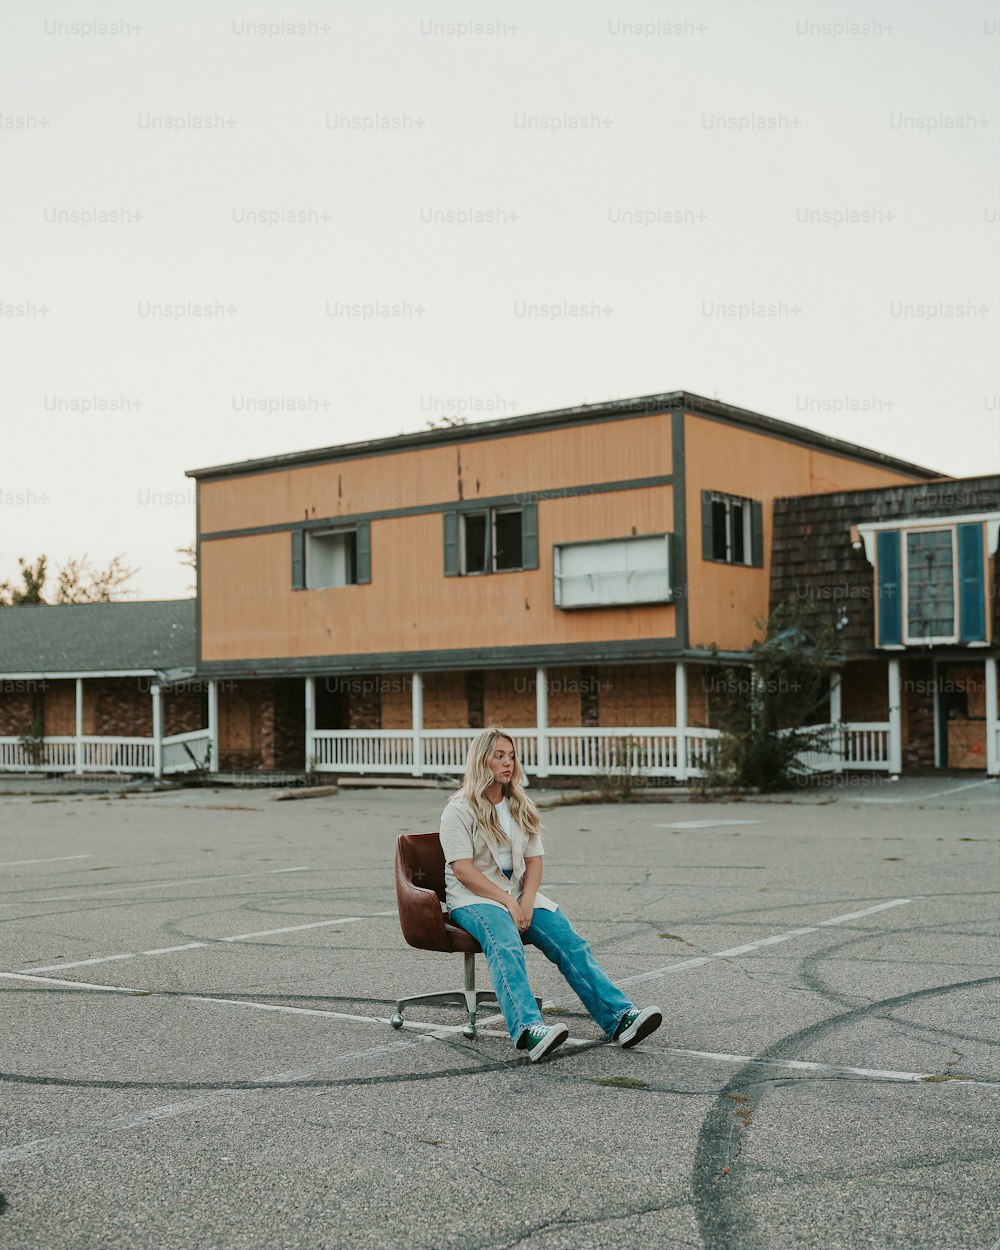 a woman sitting in a chair in a parking lot